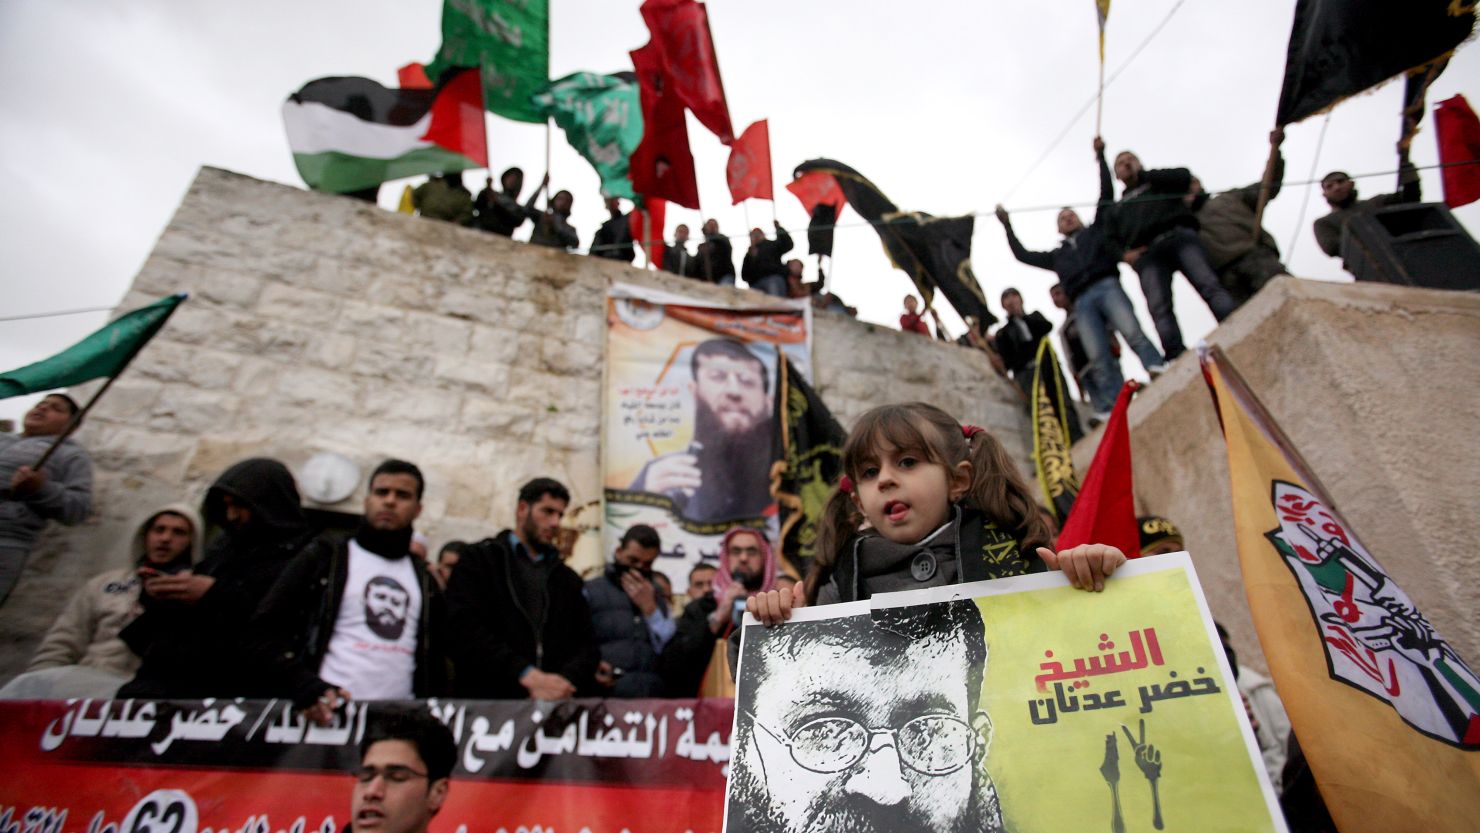 Palestinian prisoner Khader Adnan's daughter Maali takes part in a protest in support of her father, who is on hunger strike.